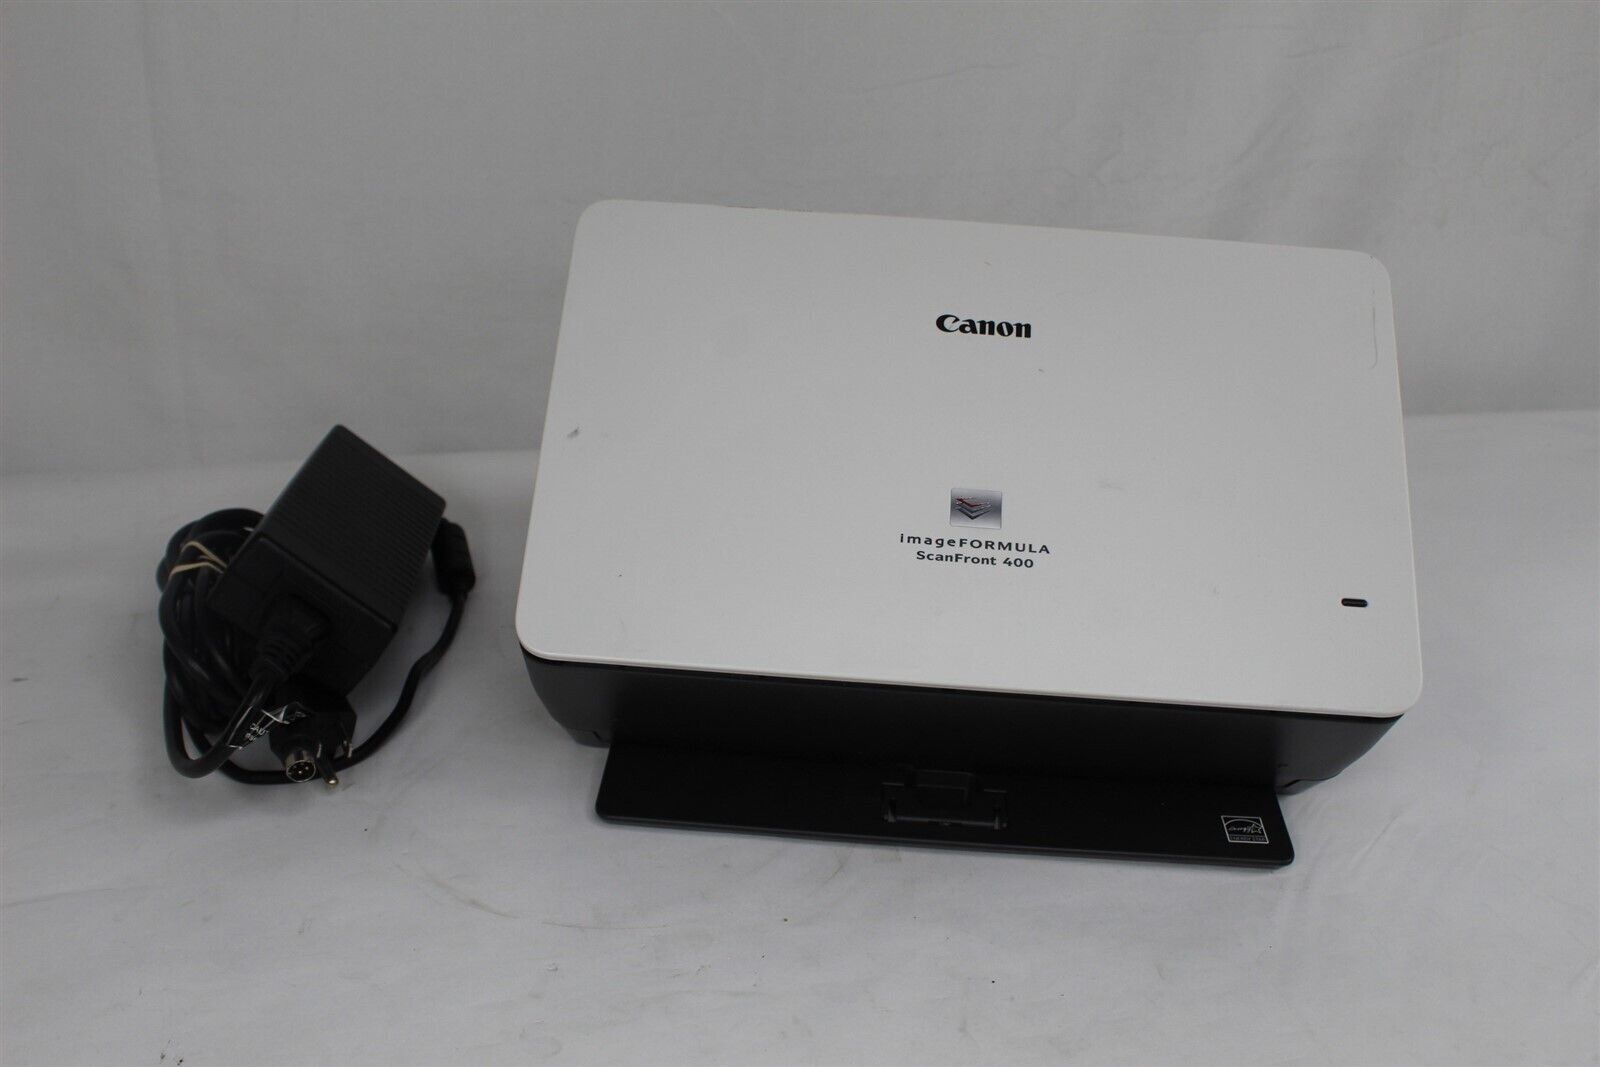 Canon imageFORMULA ScanFront 400 Networked Document Scanner M111271 w/ Adapter